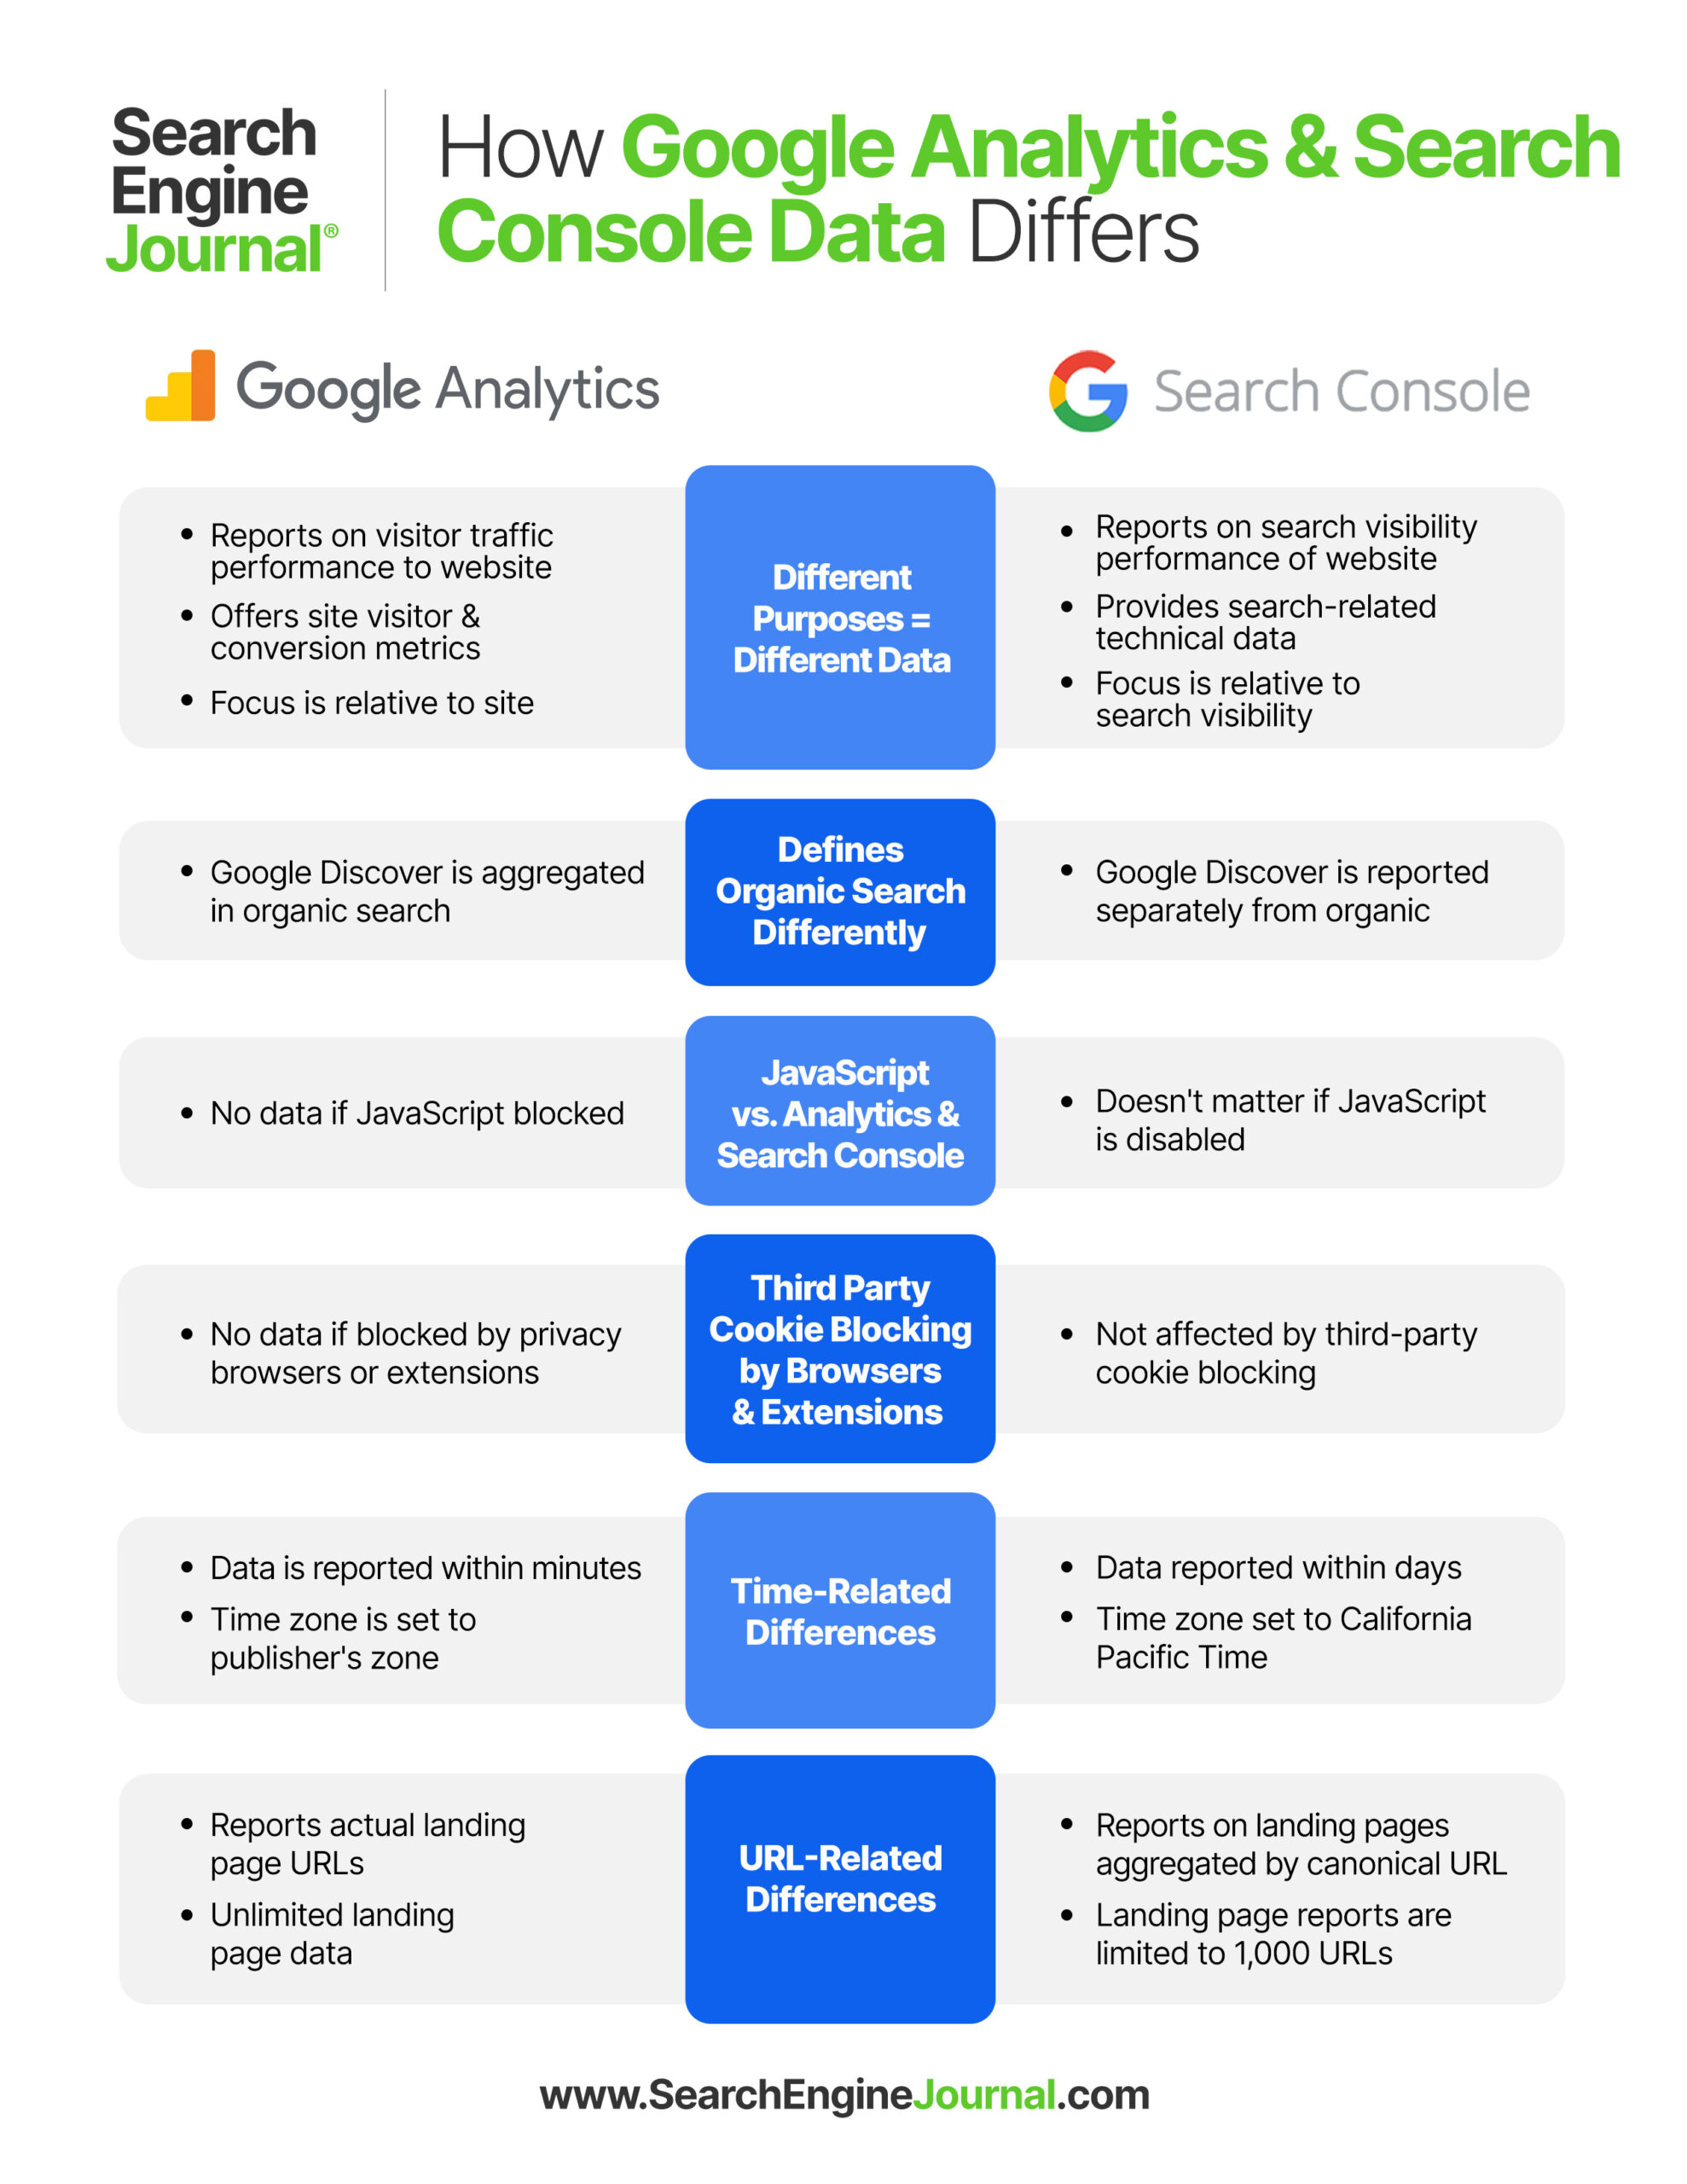 Why Google Search Console & Google Analytics Data Never Match